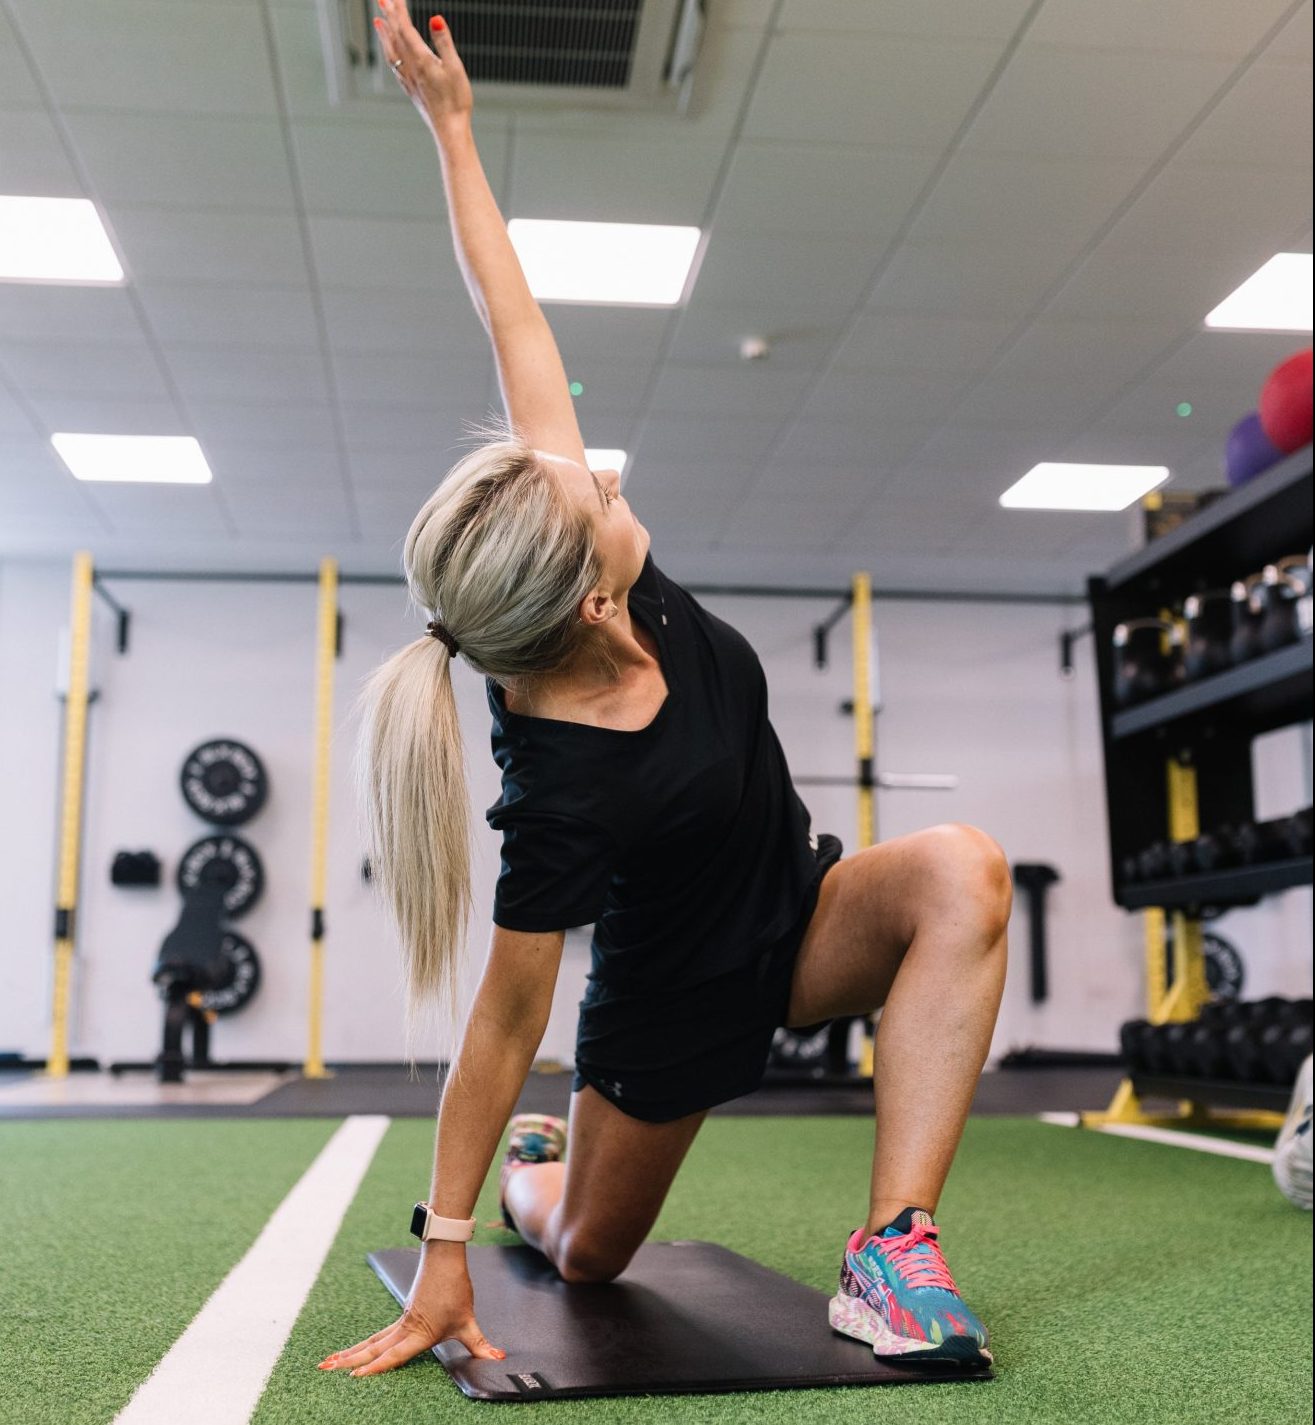 The importance of stretching and mobility: the Catalyst Gym